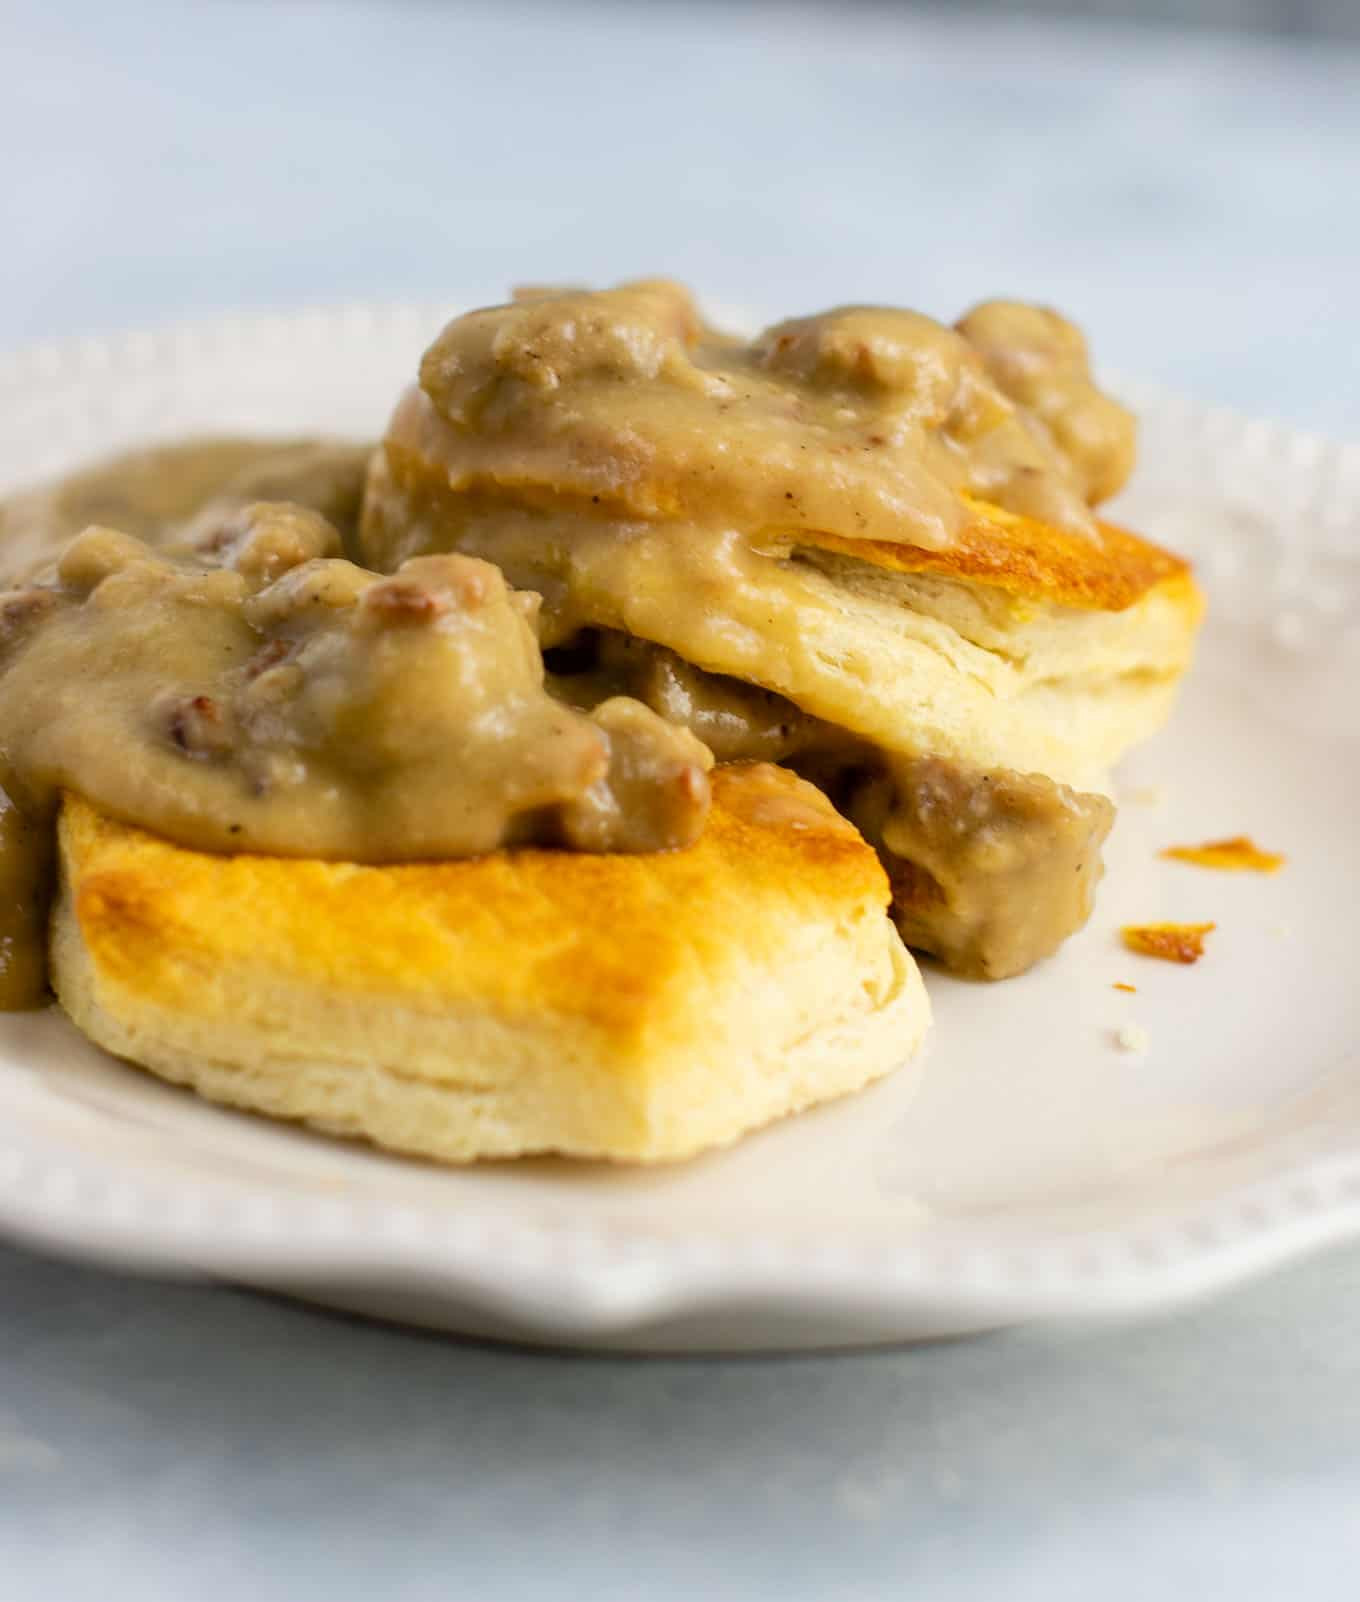 Vegetarian Biscuits And Gravy
 Ve arian Biscuits and Gravy Recipe Build Your Bite